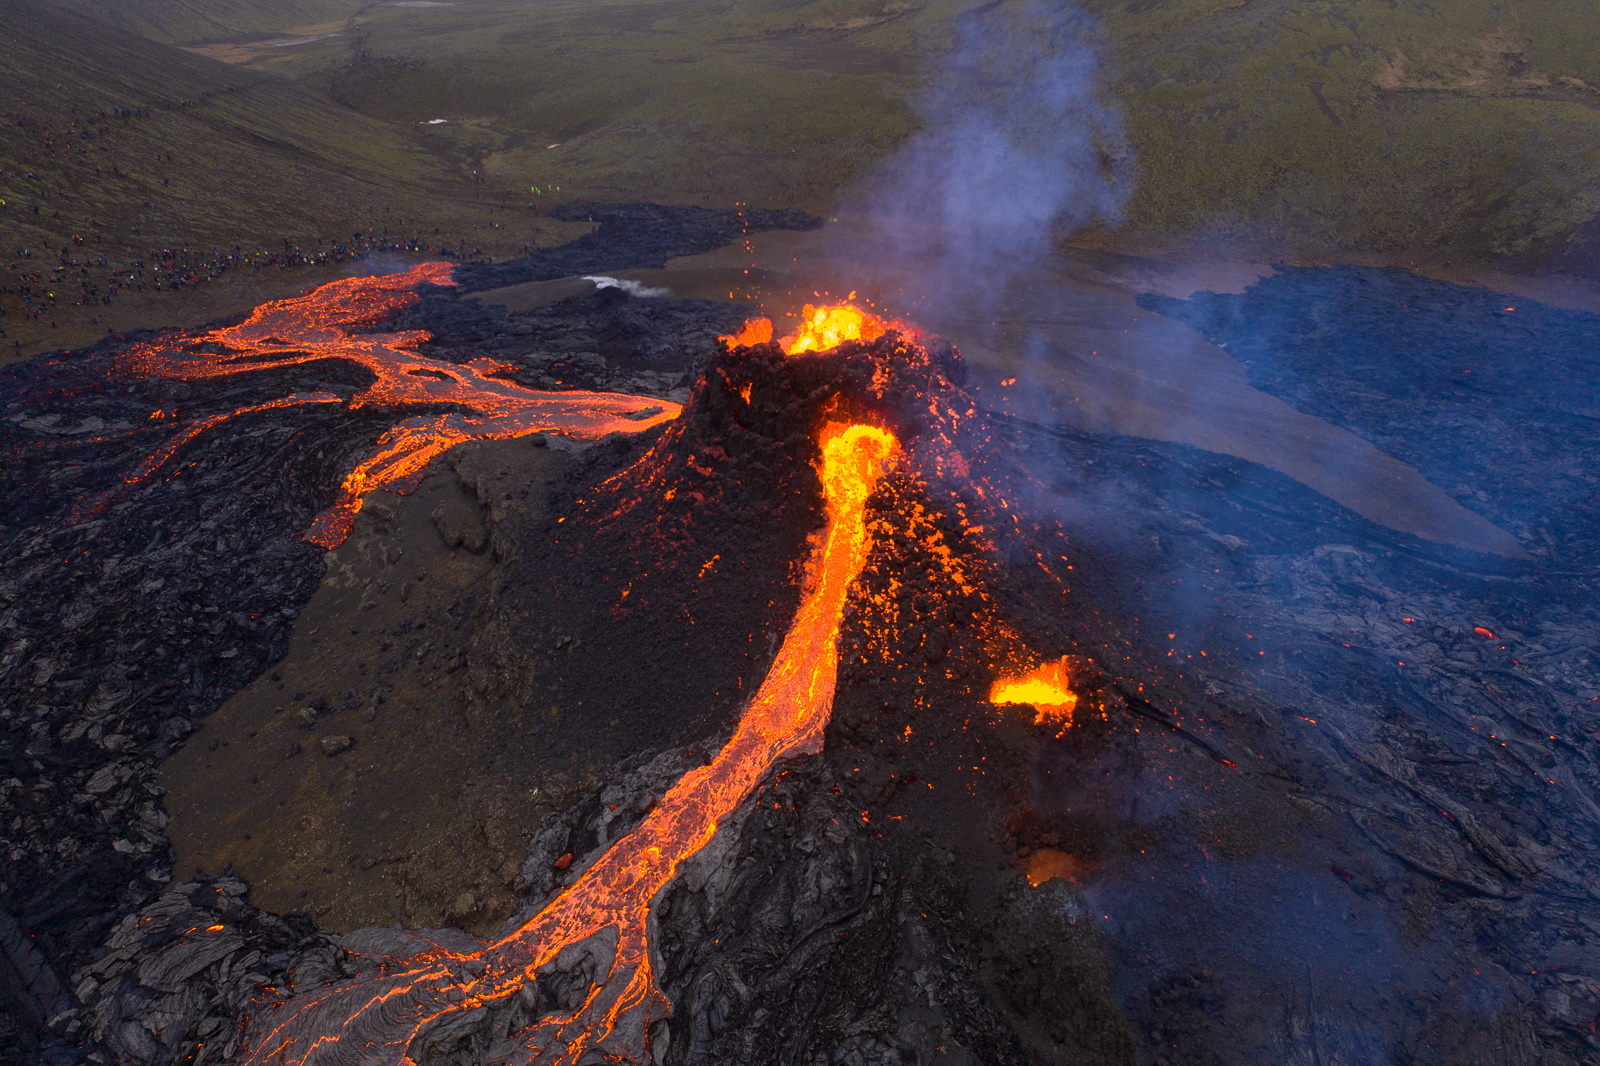 Red hot lava rivers flowing from a volcanic crater